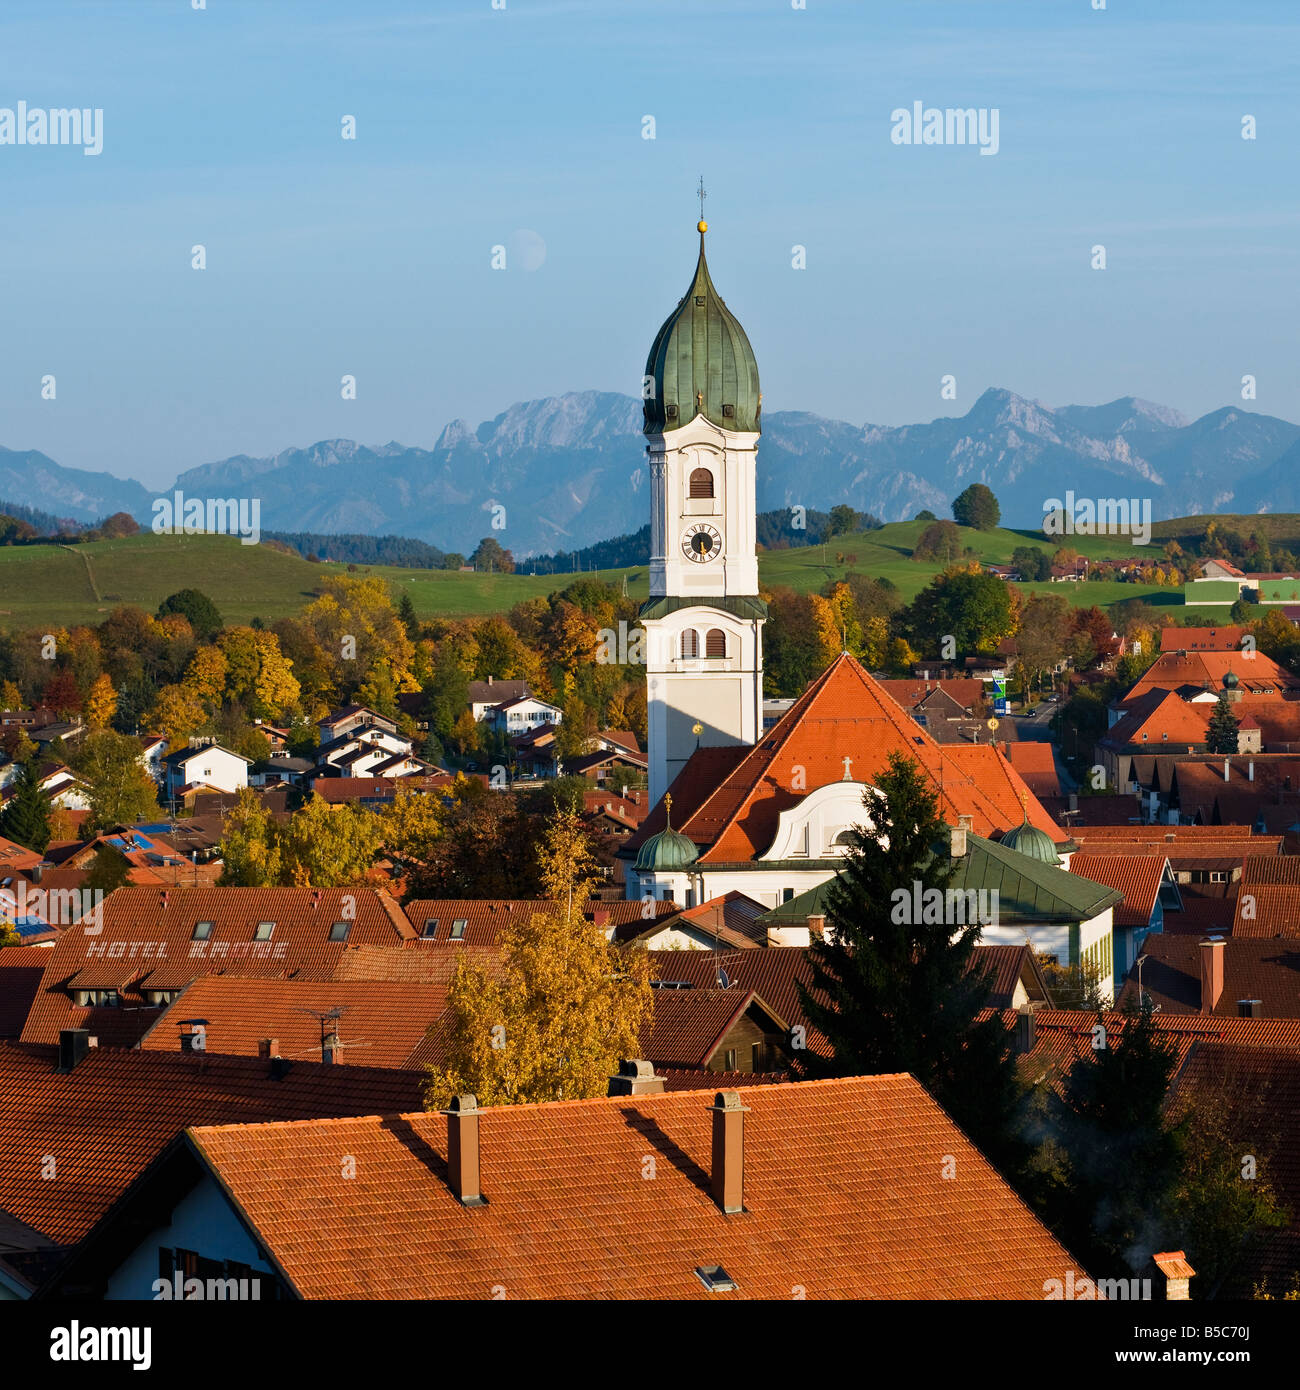 Tower of Saint Andreas Church and mountains of Allgaeu region, Nesselwang, Germany Stock Photo